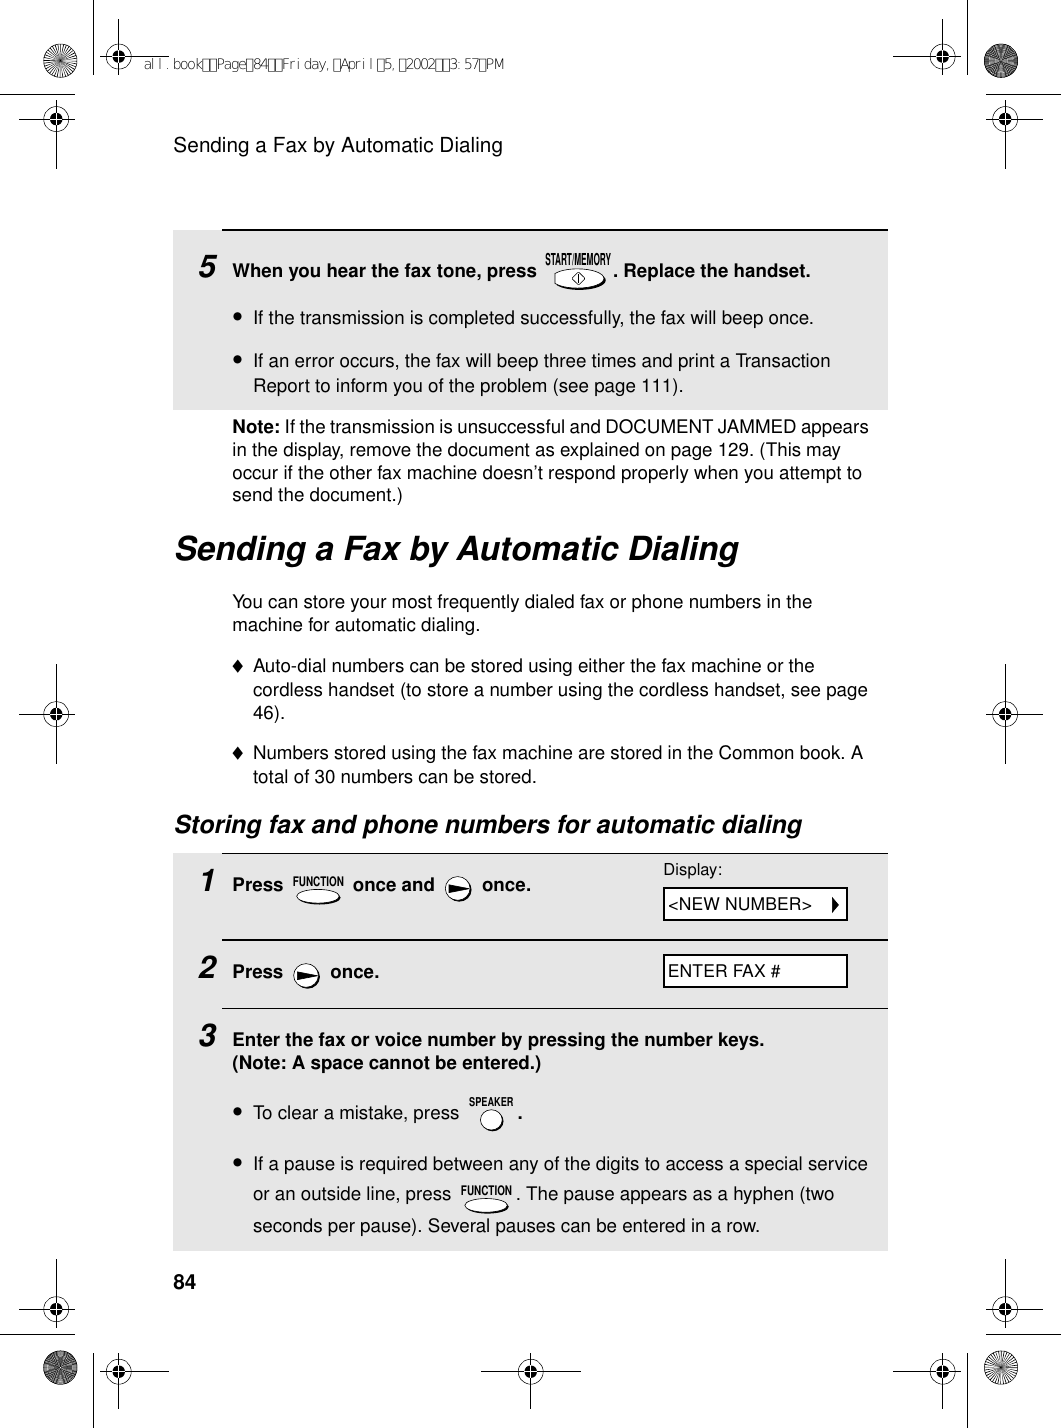 Sending a Fax by Automatic Dialing84Sending a Fax by Automatic DialingYou can store your most frequently dialed fax or phone numbers in the machine for automatic dialing. ♦Auto-dial numbers can be stored using either the fax machine or the cordless handset (to store a number using the cordless handset, see page 46). ♦Numbers stored using the fax machine are stored in the Common book. A total of 30 numbers can be stored. Storing fax and phone numbers for automatic dialing1Press   once and   once.2Press  once.3Enter the fax or voice number by pressing the number keys. (Note: A space cannot be entered.)•To clear a mistake, press  .•If a pause is required between any of the digits to access a special service or an outside line, press  . The pause appears as a hyphen (two seconds per pause). Several pauses can be entered in a row.FUNCTIONSPEAKERFUNCTION5When you hear the fax tone, press  . Replace the handset.•If the transmission is completed successfully, the fax will beep once.•If an error occurs, the fax will beep three times and print a Transaction Report to inform you of the problem (see page 111).START/MEMORYDisplay:ENTER FAX #&lt;NEW NUMBER&gt;Note: If the transmission is unsuccessful and DOCUMENT JAMMED appears in the display, remove the document as explained on page 129. (This may occur if the other fax machine doesn’t respond properly when you attempt to send the document.)all.bookPage84Friday,April5,20023:57PM